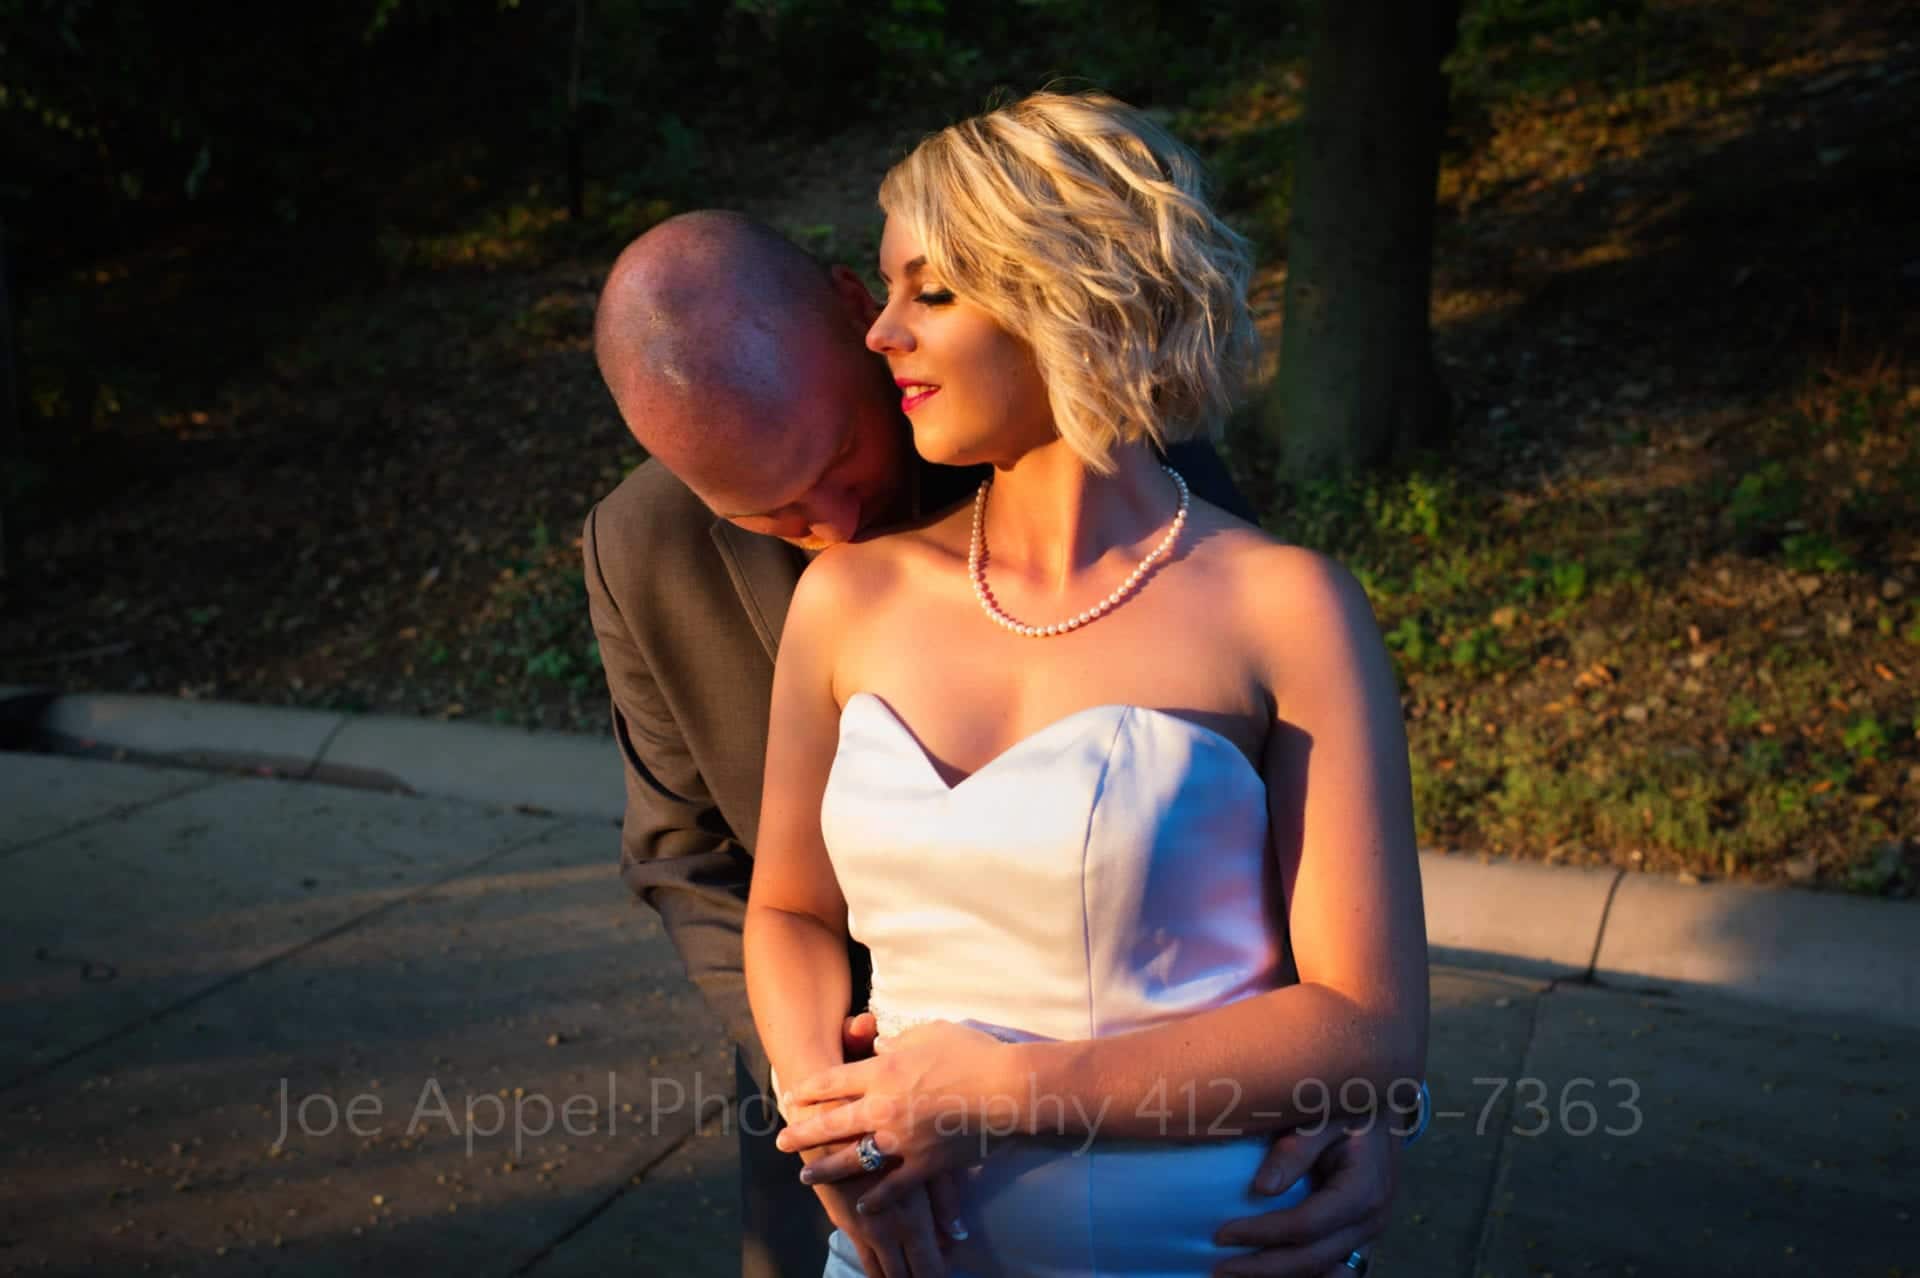 A groom stands behind his bride and kisses her shoulder in the setting sun. She looks to the side and smiles.